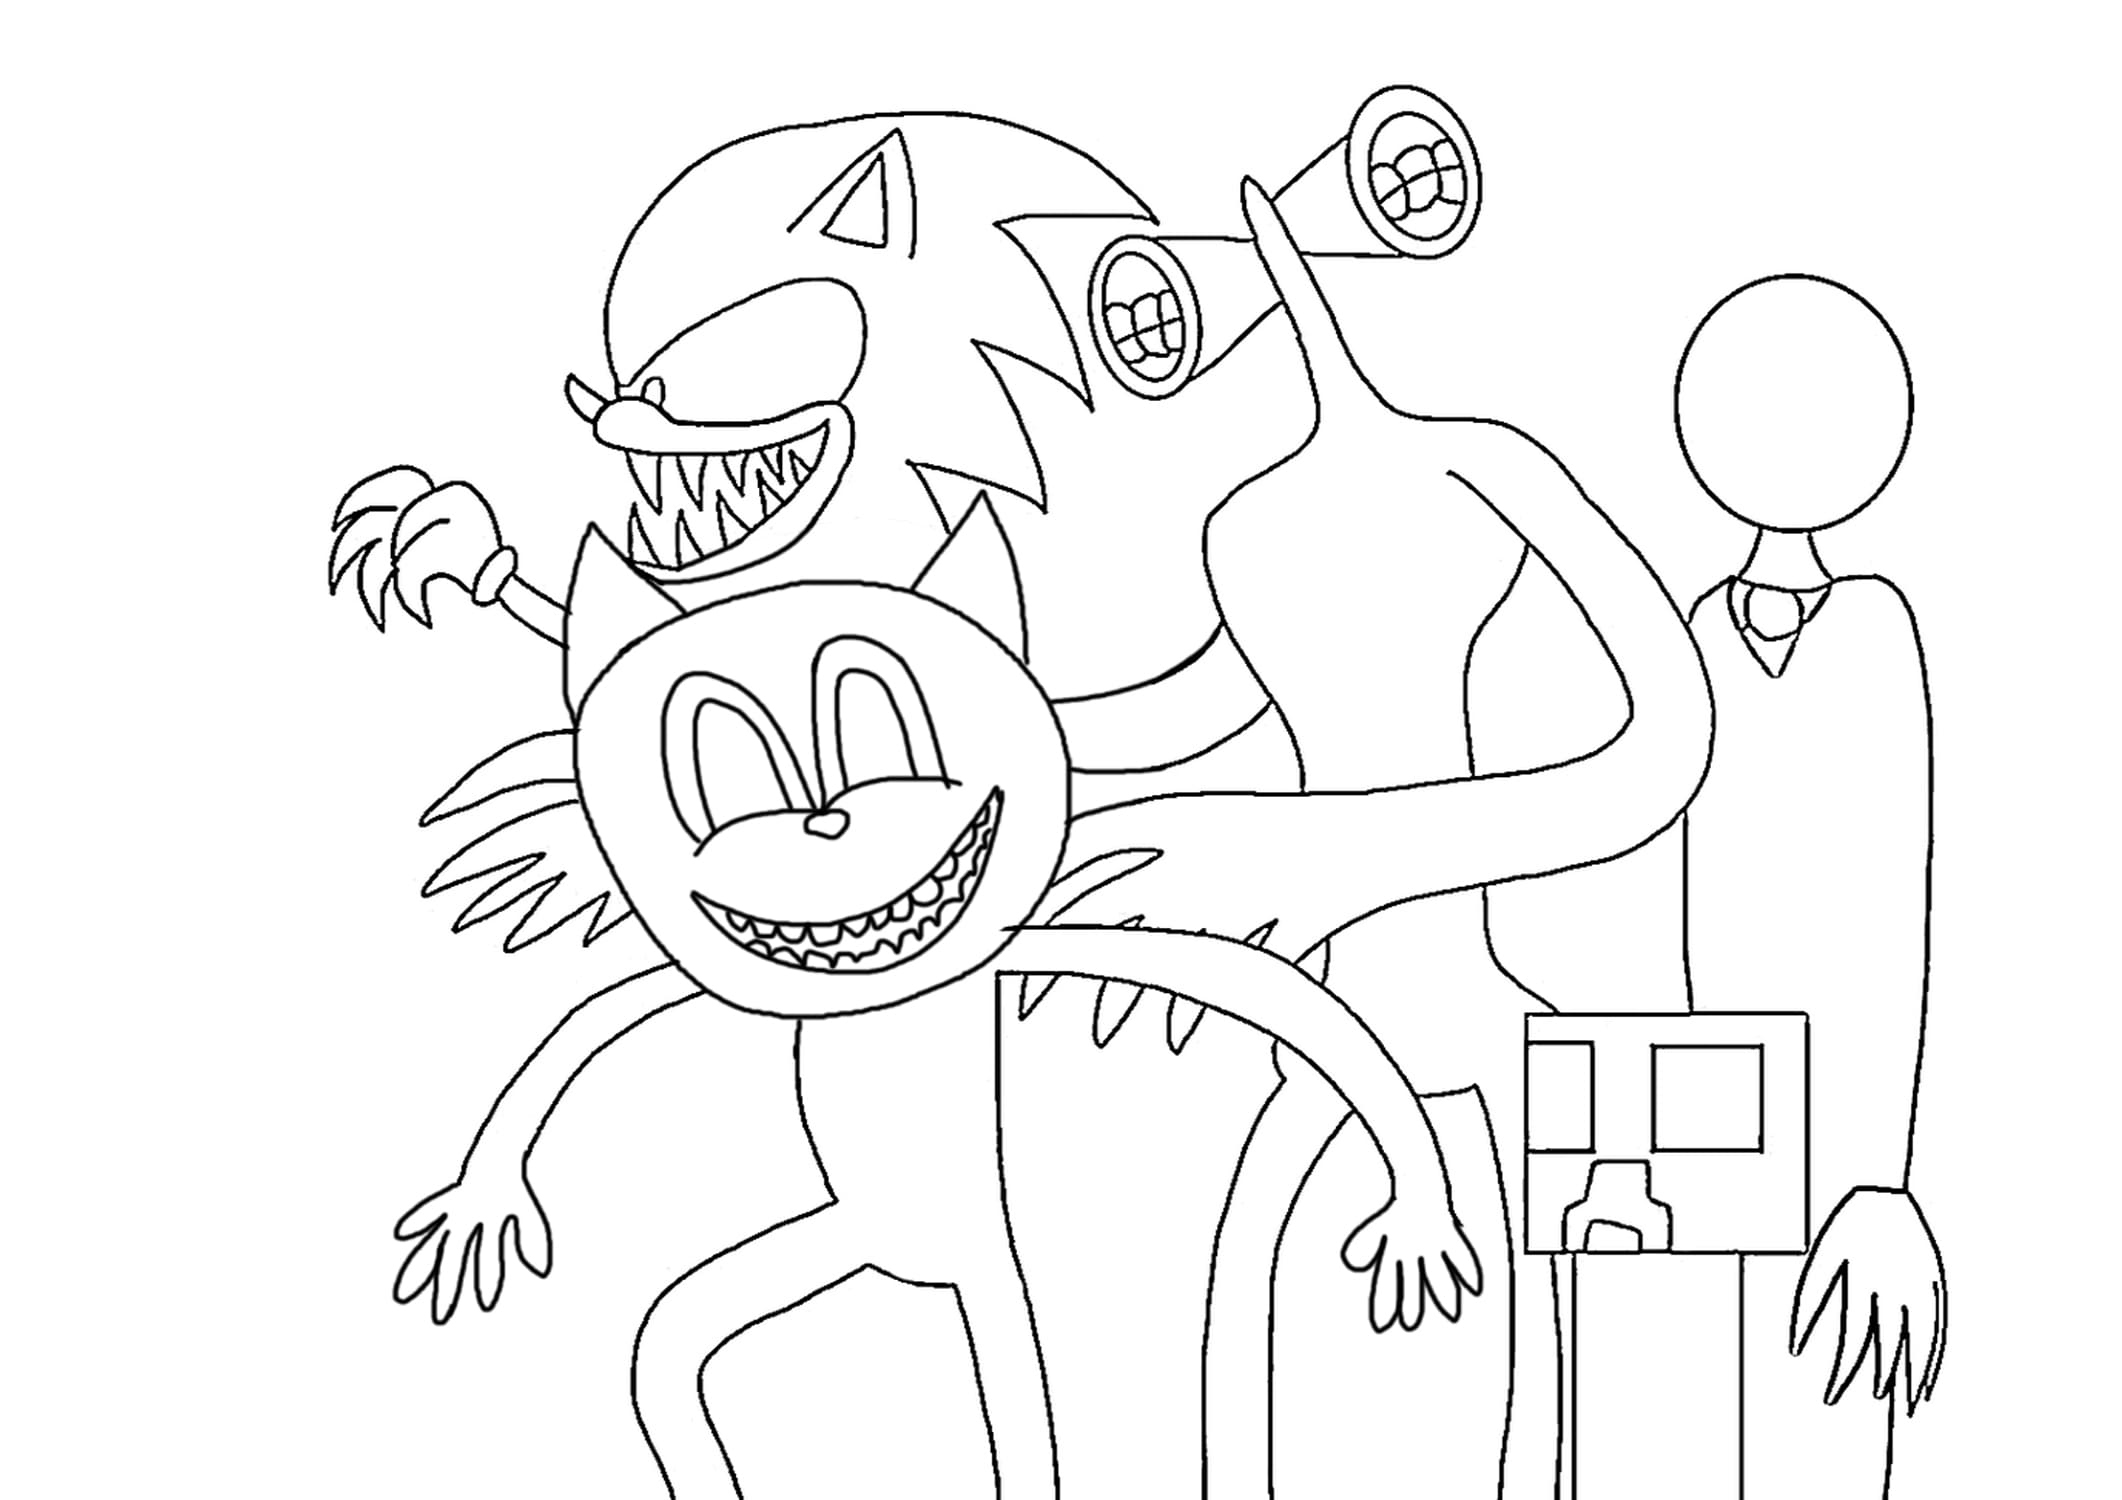 Coloring page Cartoon Cat , Siren head, Sonic, Creeper and Slenderman are the main monsters